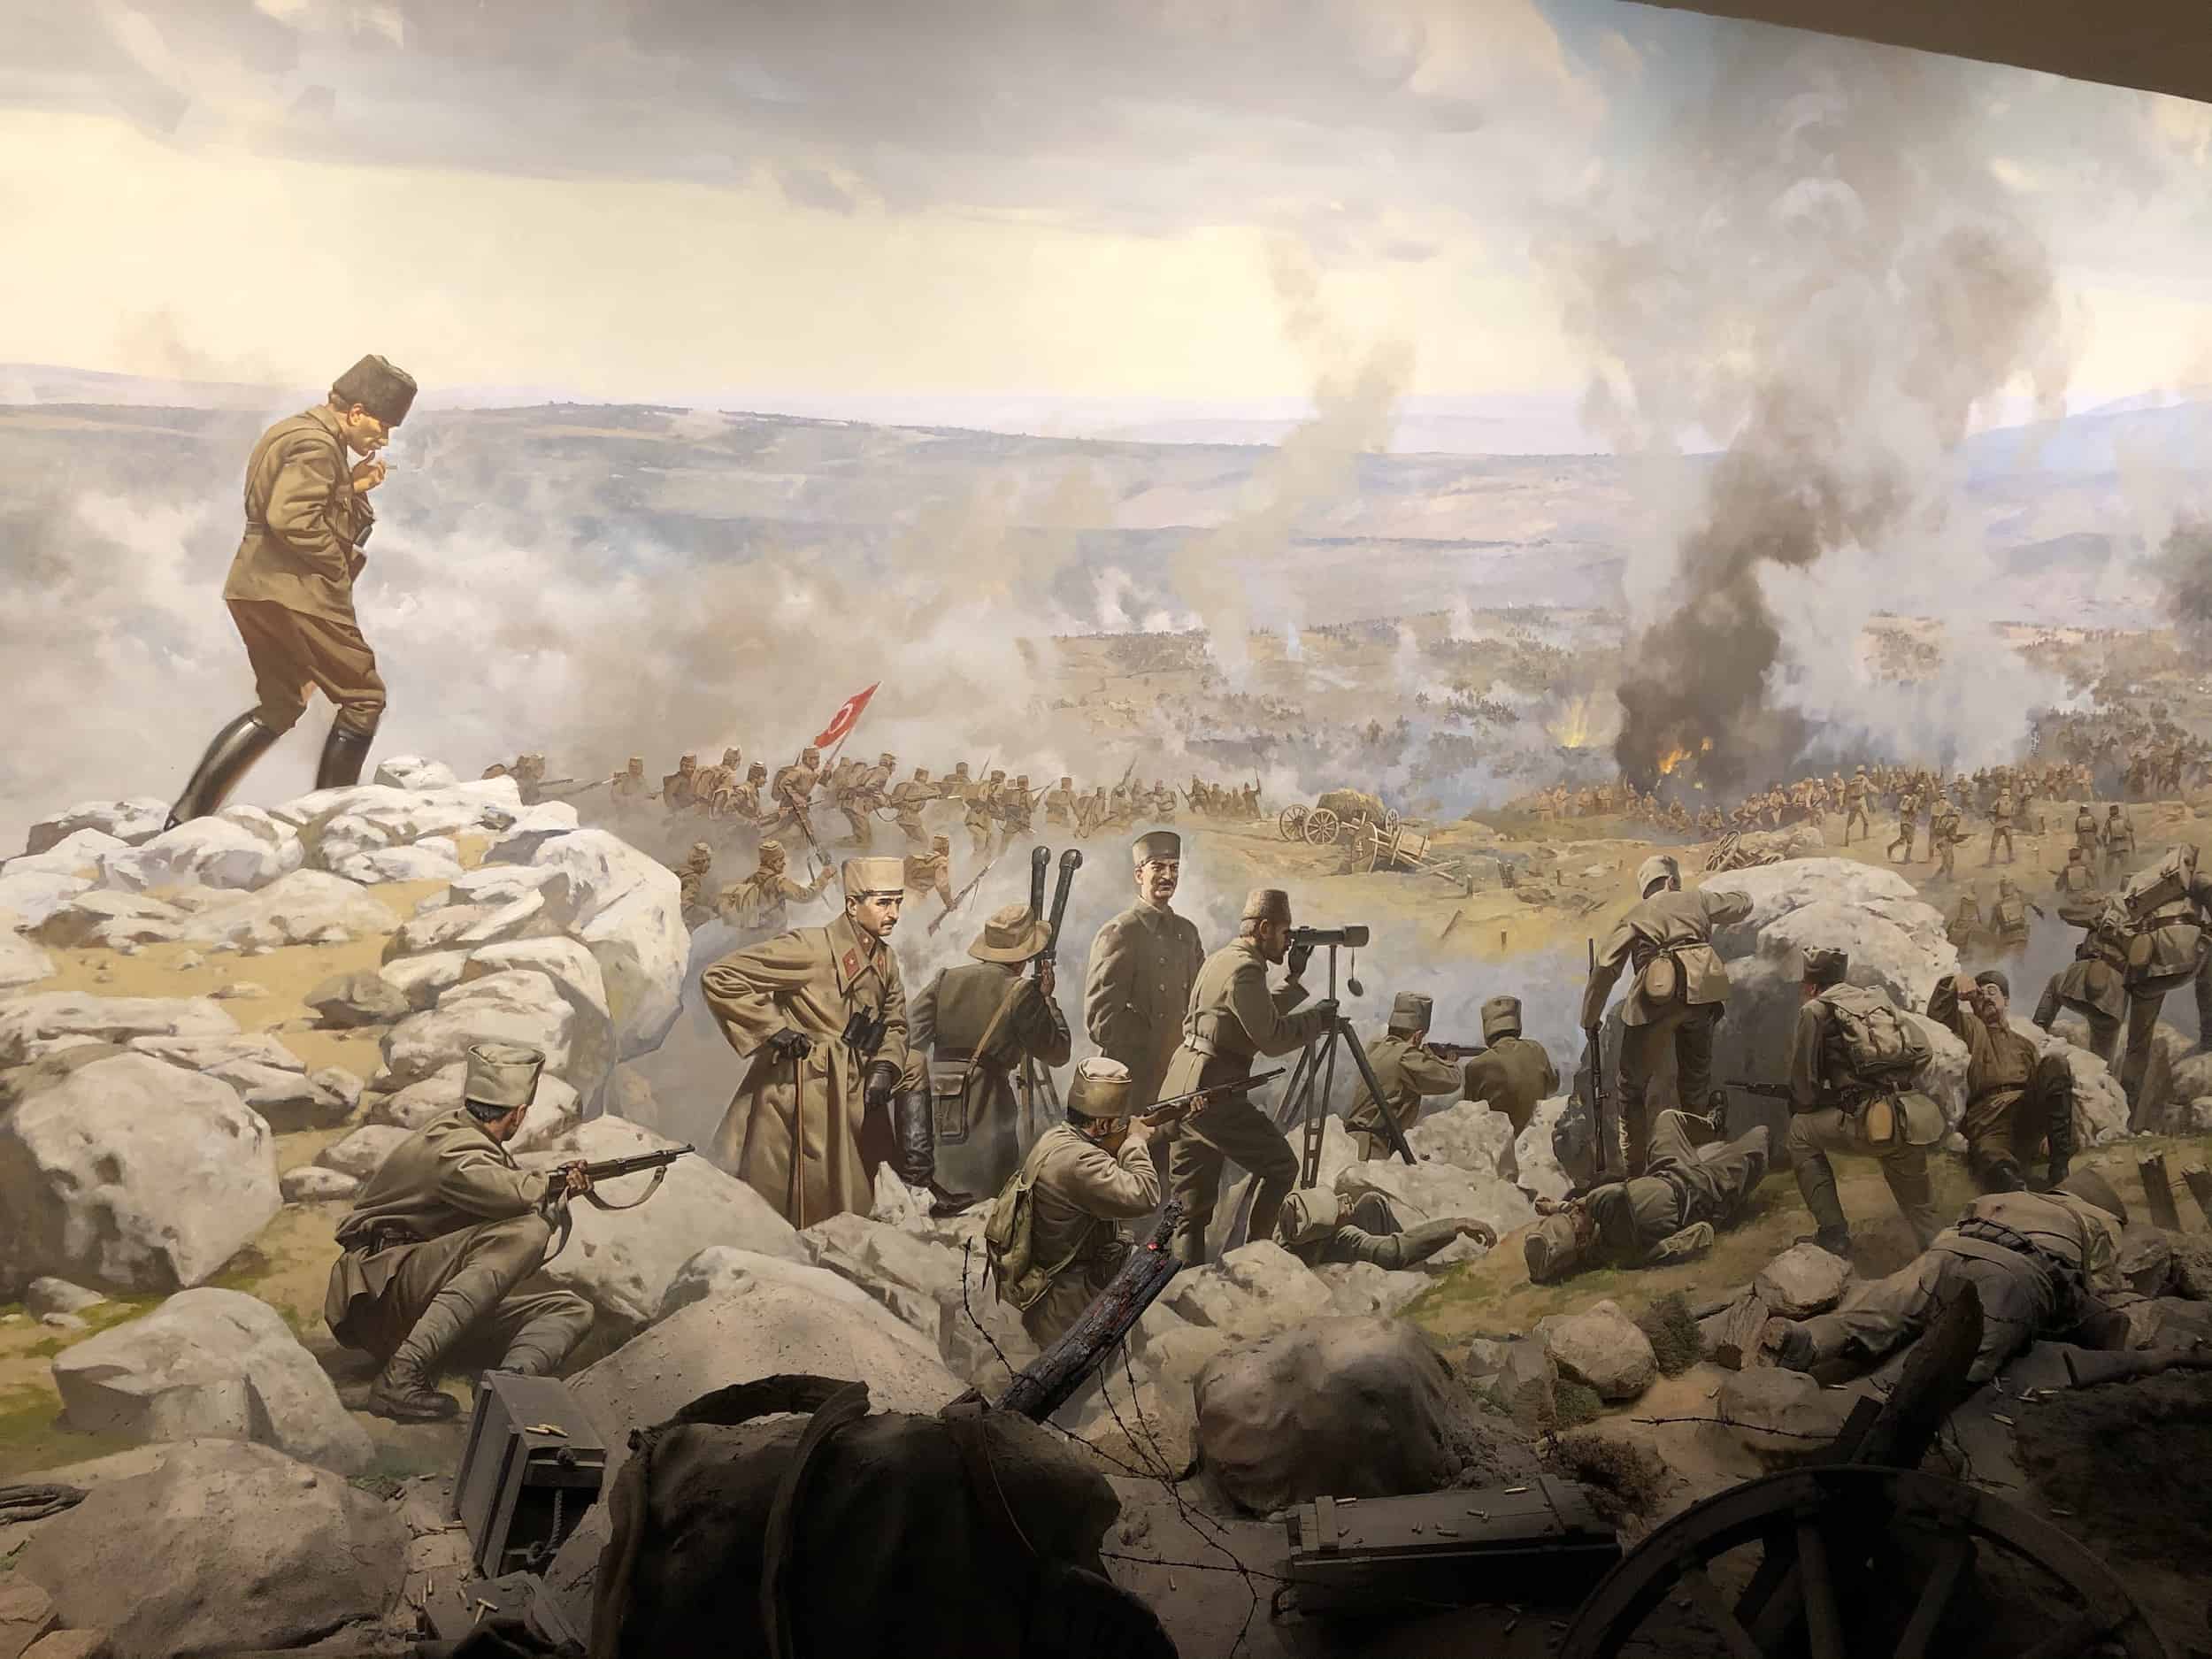 Commander-in-Chief Battle at the Atatürk and War of Independence Museum